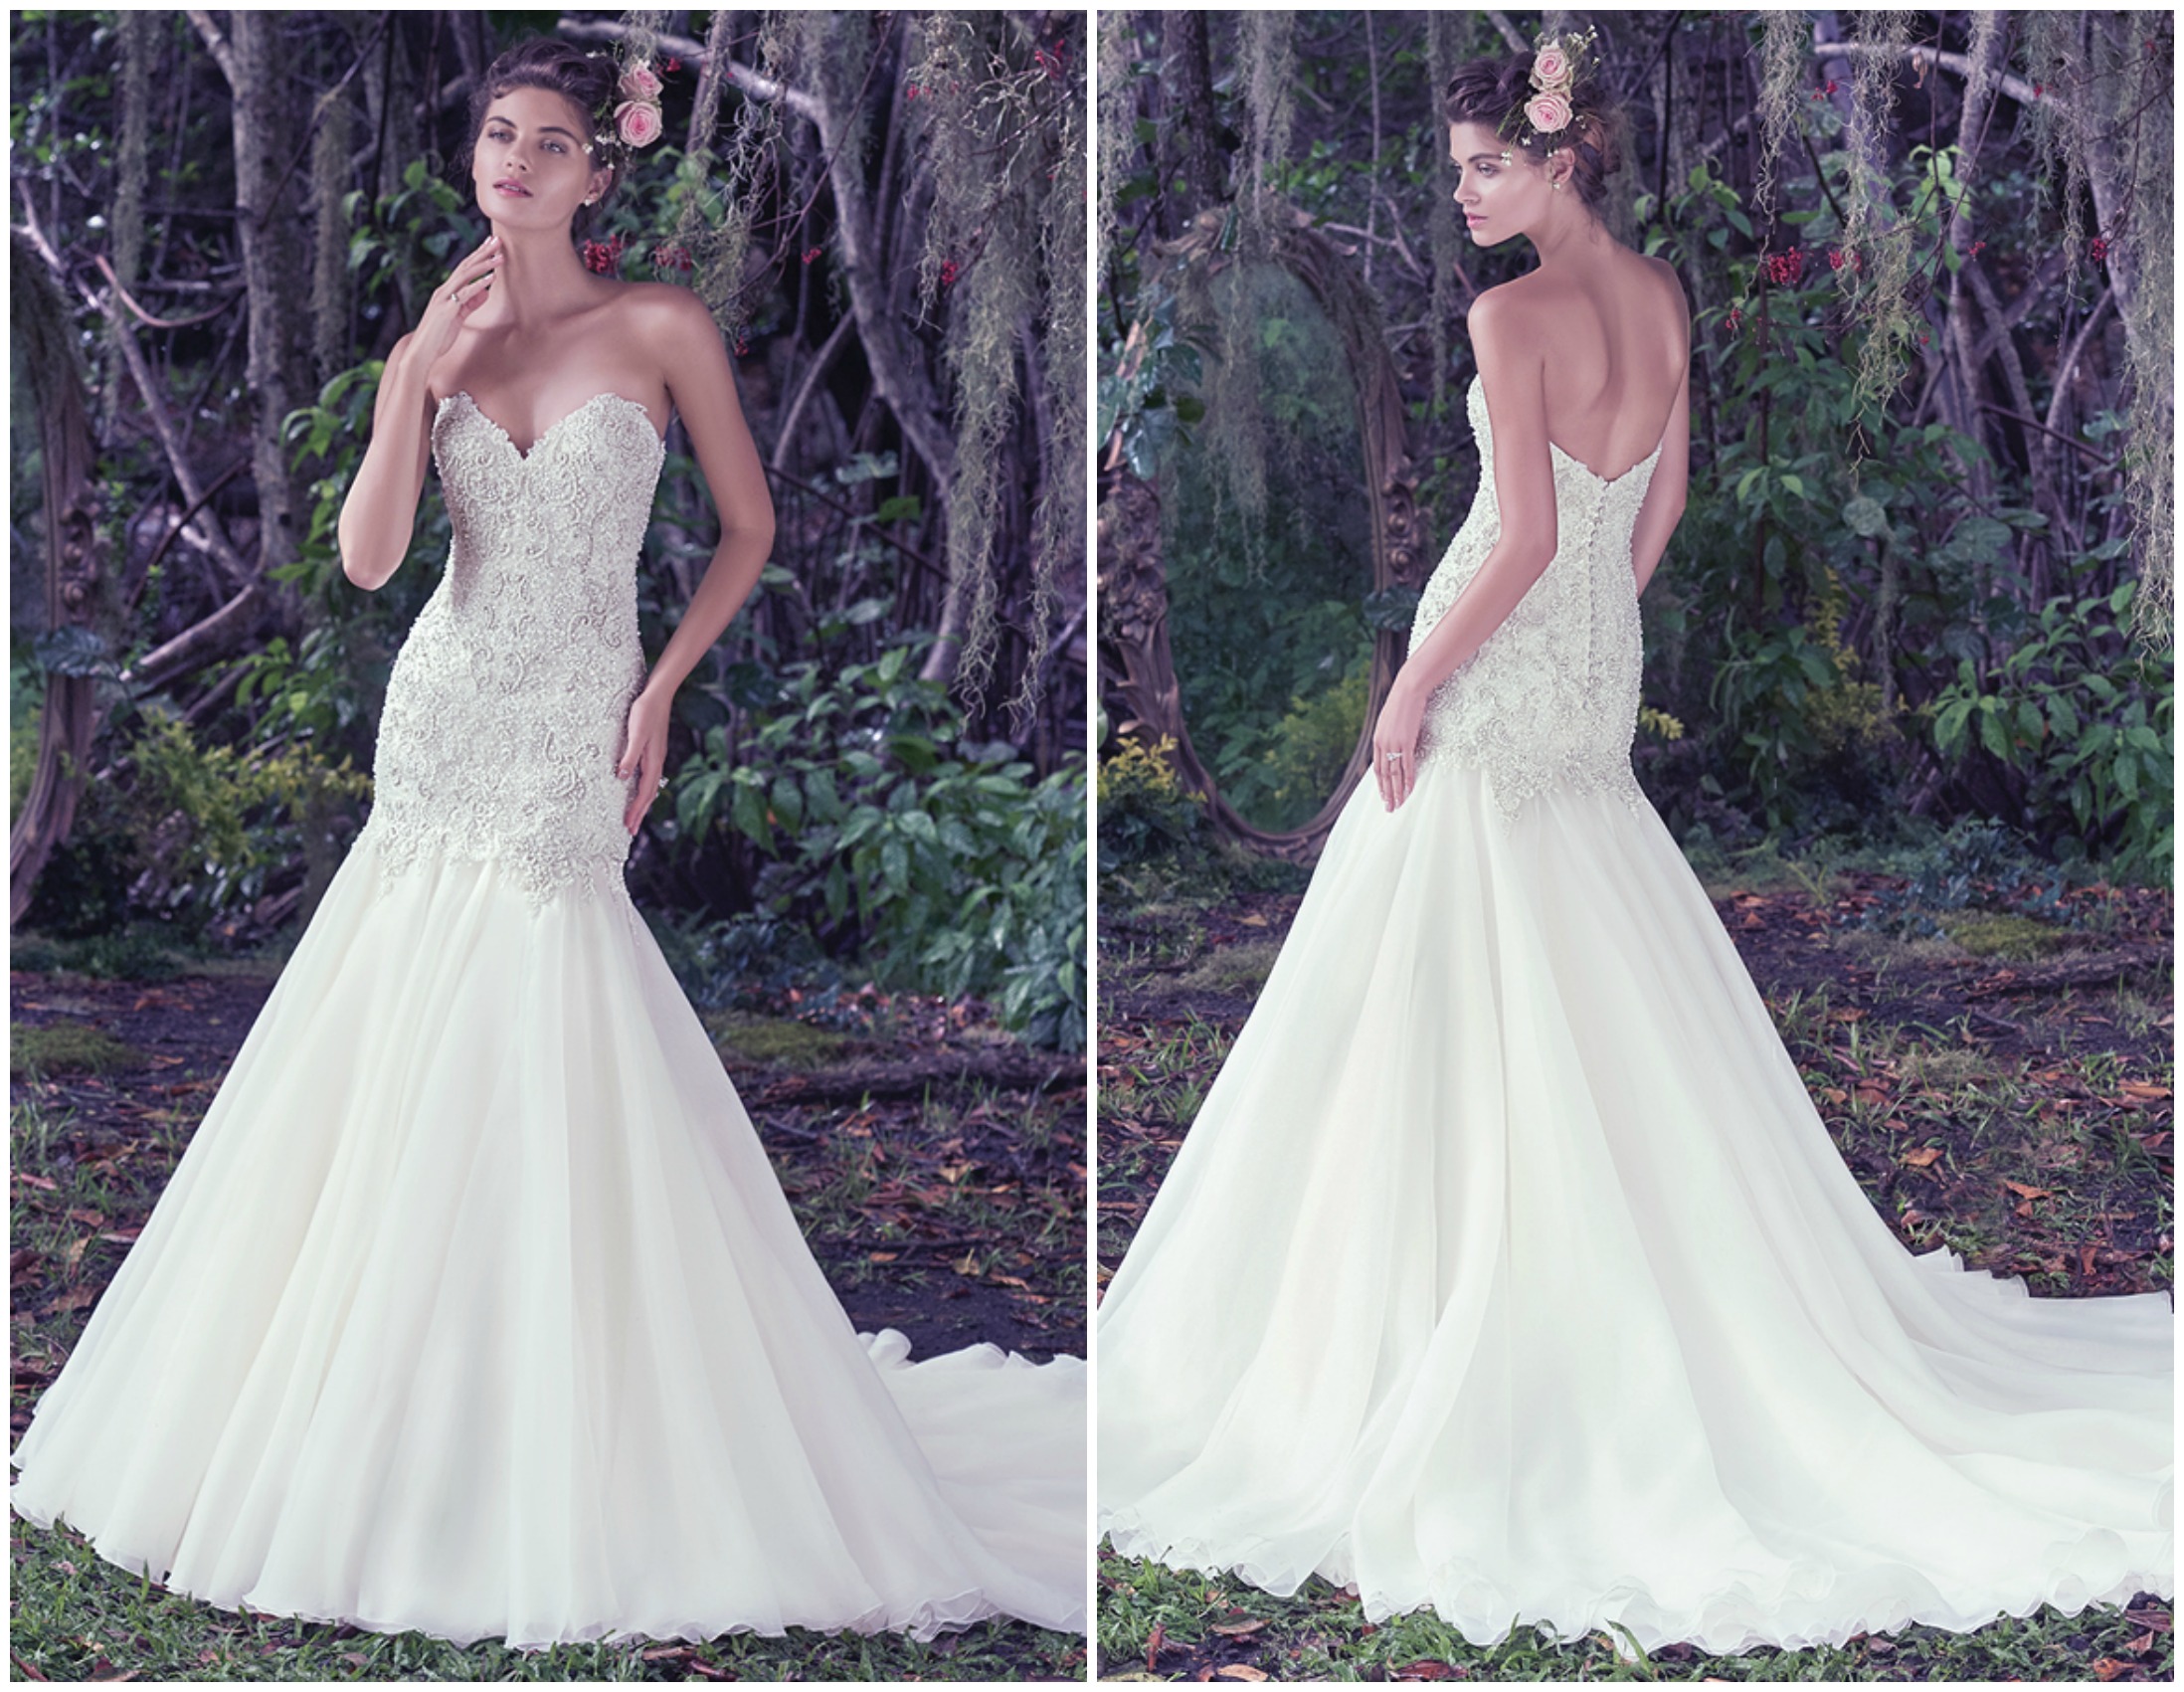 Perfect for the truly romantic bride, embellished lace adorns the bodice of this Chic organza fit and flare wedding dress. Finished with a classic sweetheart neckline and covered buttons over zipper and inner corset closure. 

<a href="https://www.maggiesottero.com/maggie-sottero/baxter/9697" target="_blank">Maggie Sottero</a>